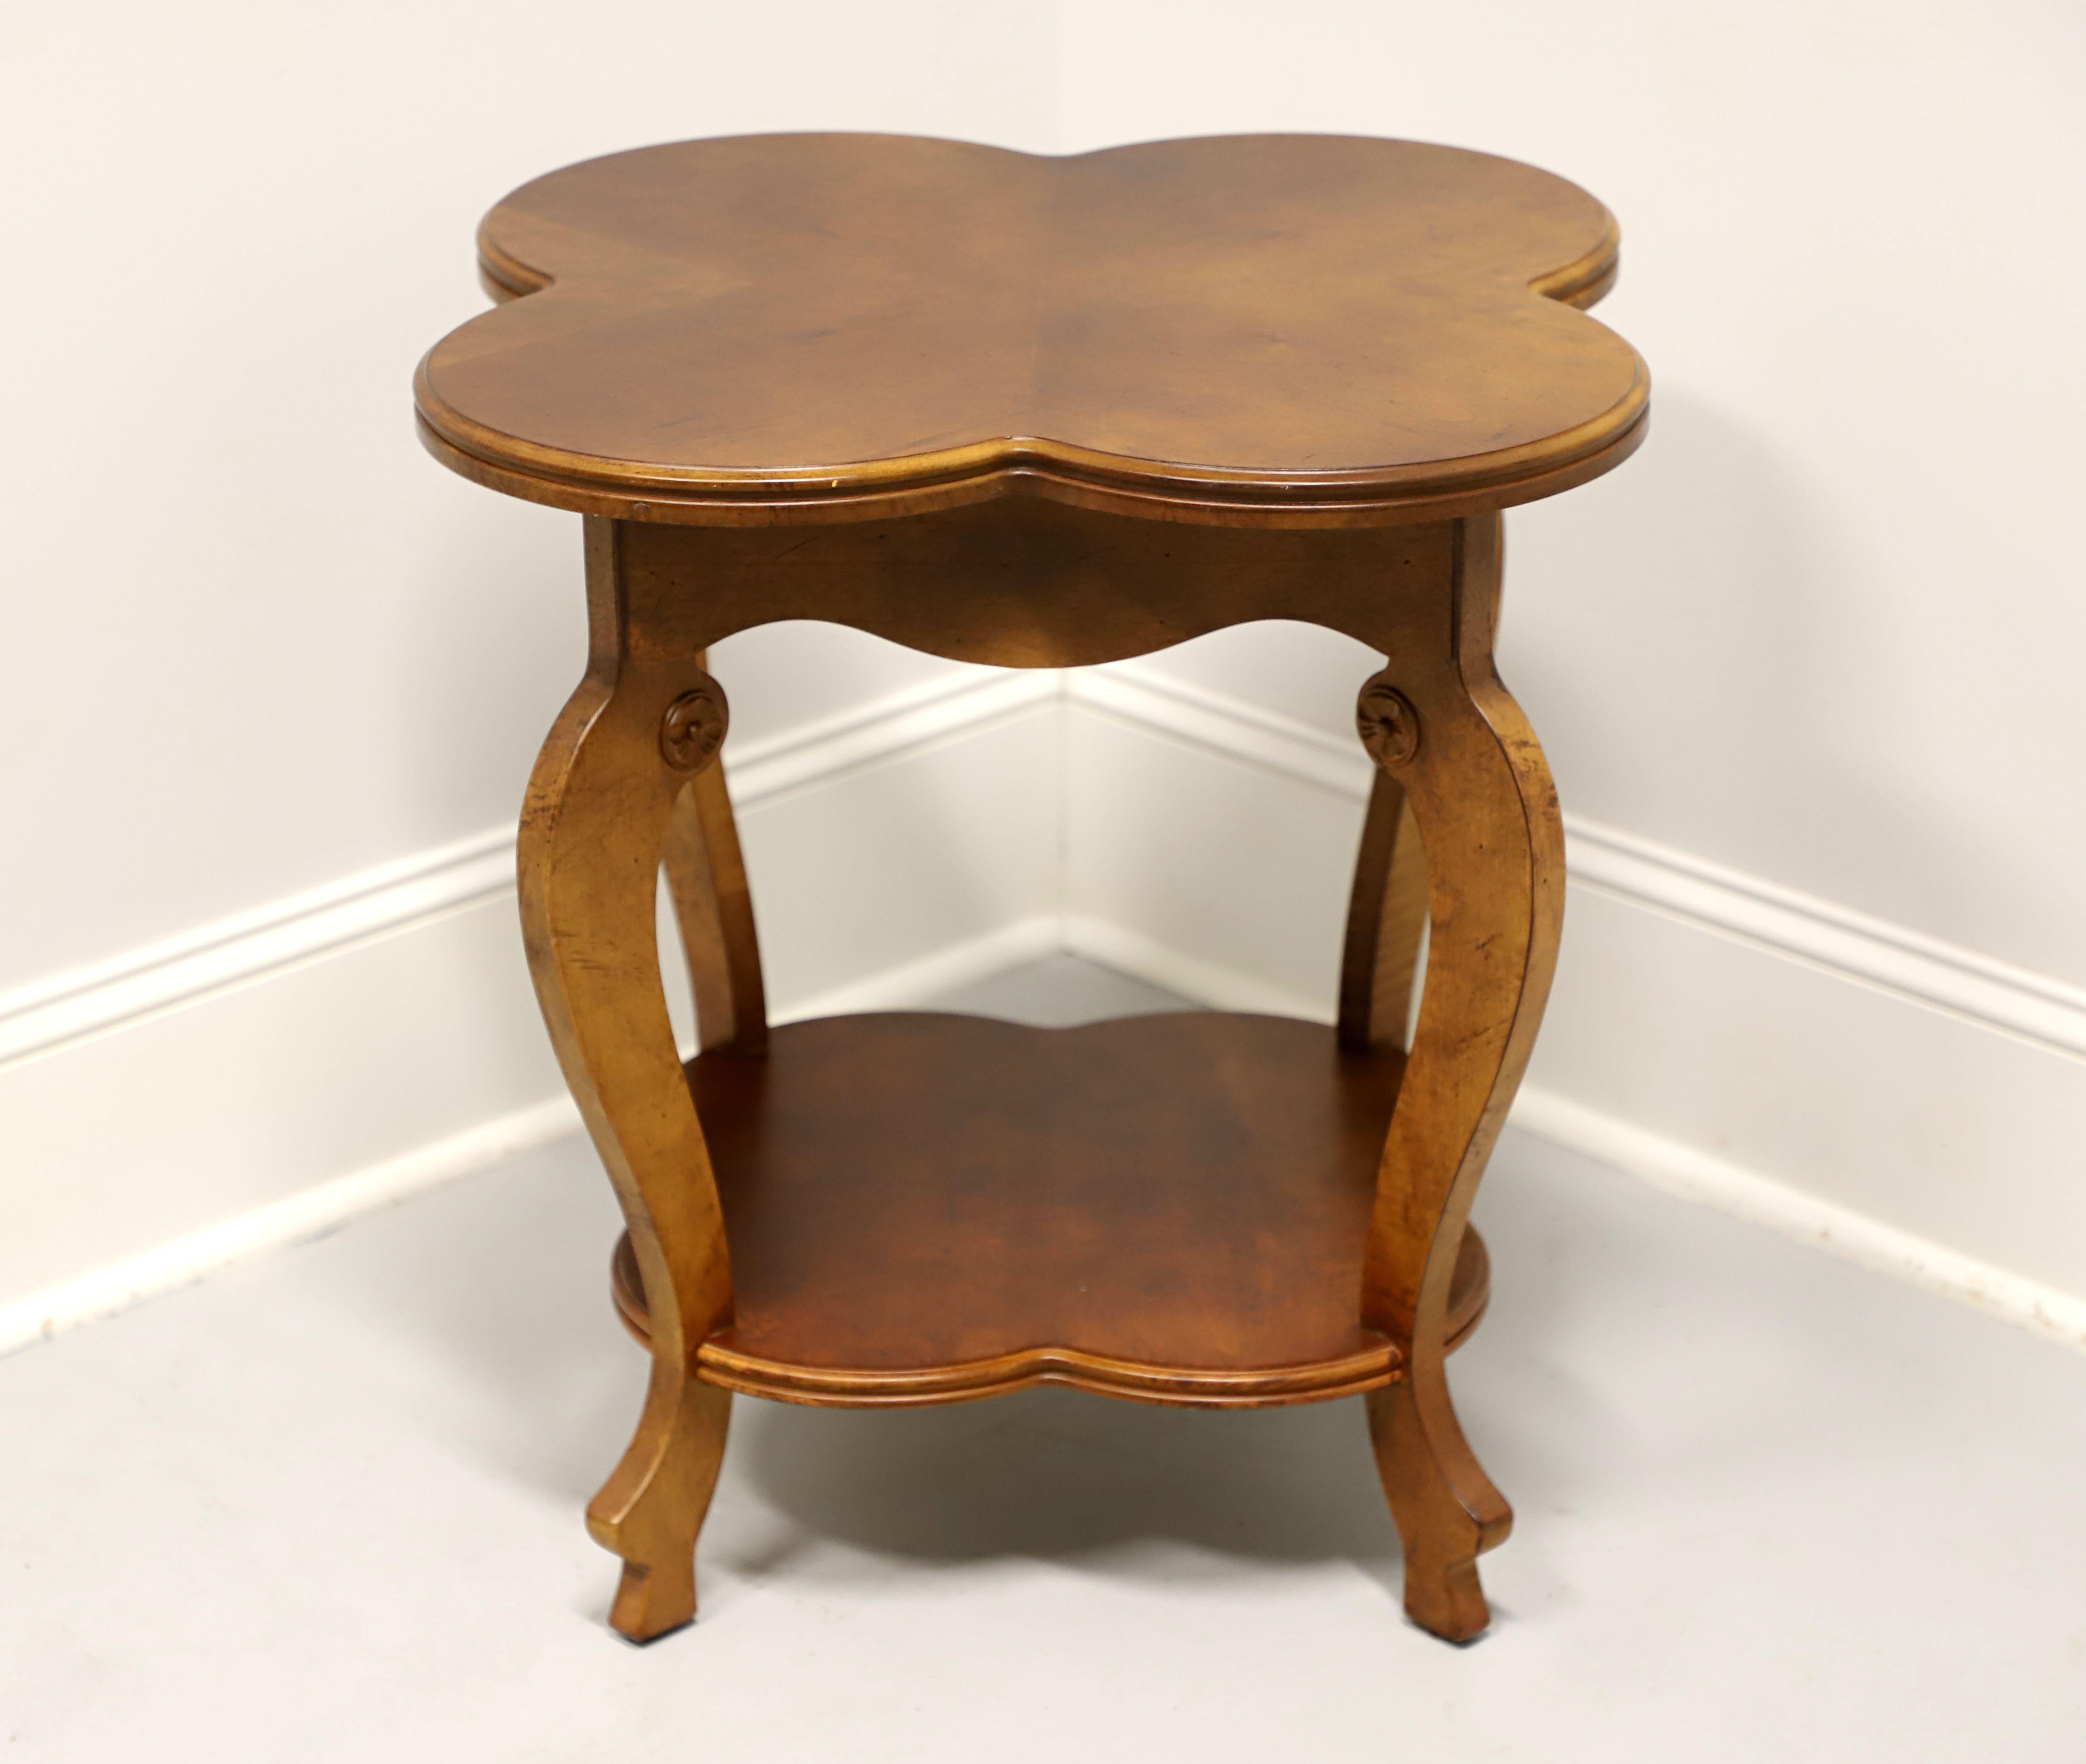 An Art Nouveau style accent table by Lane Furniture. Maple with an inlaid four leaf clover shaped top, carved apron, undertier shelf, curved legs with decorative carved medallions under the apron, and carved feet. Made in Altavista, Virginia, USA,